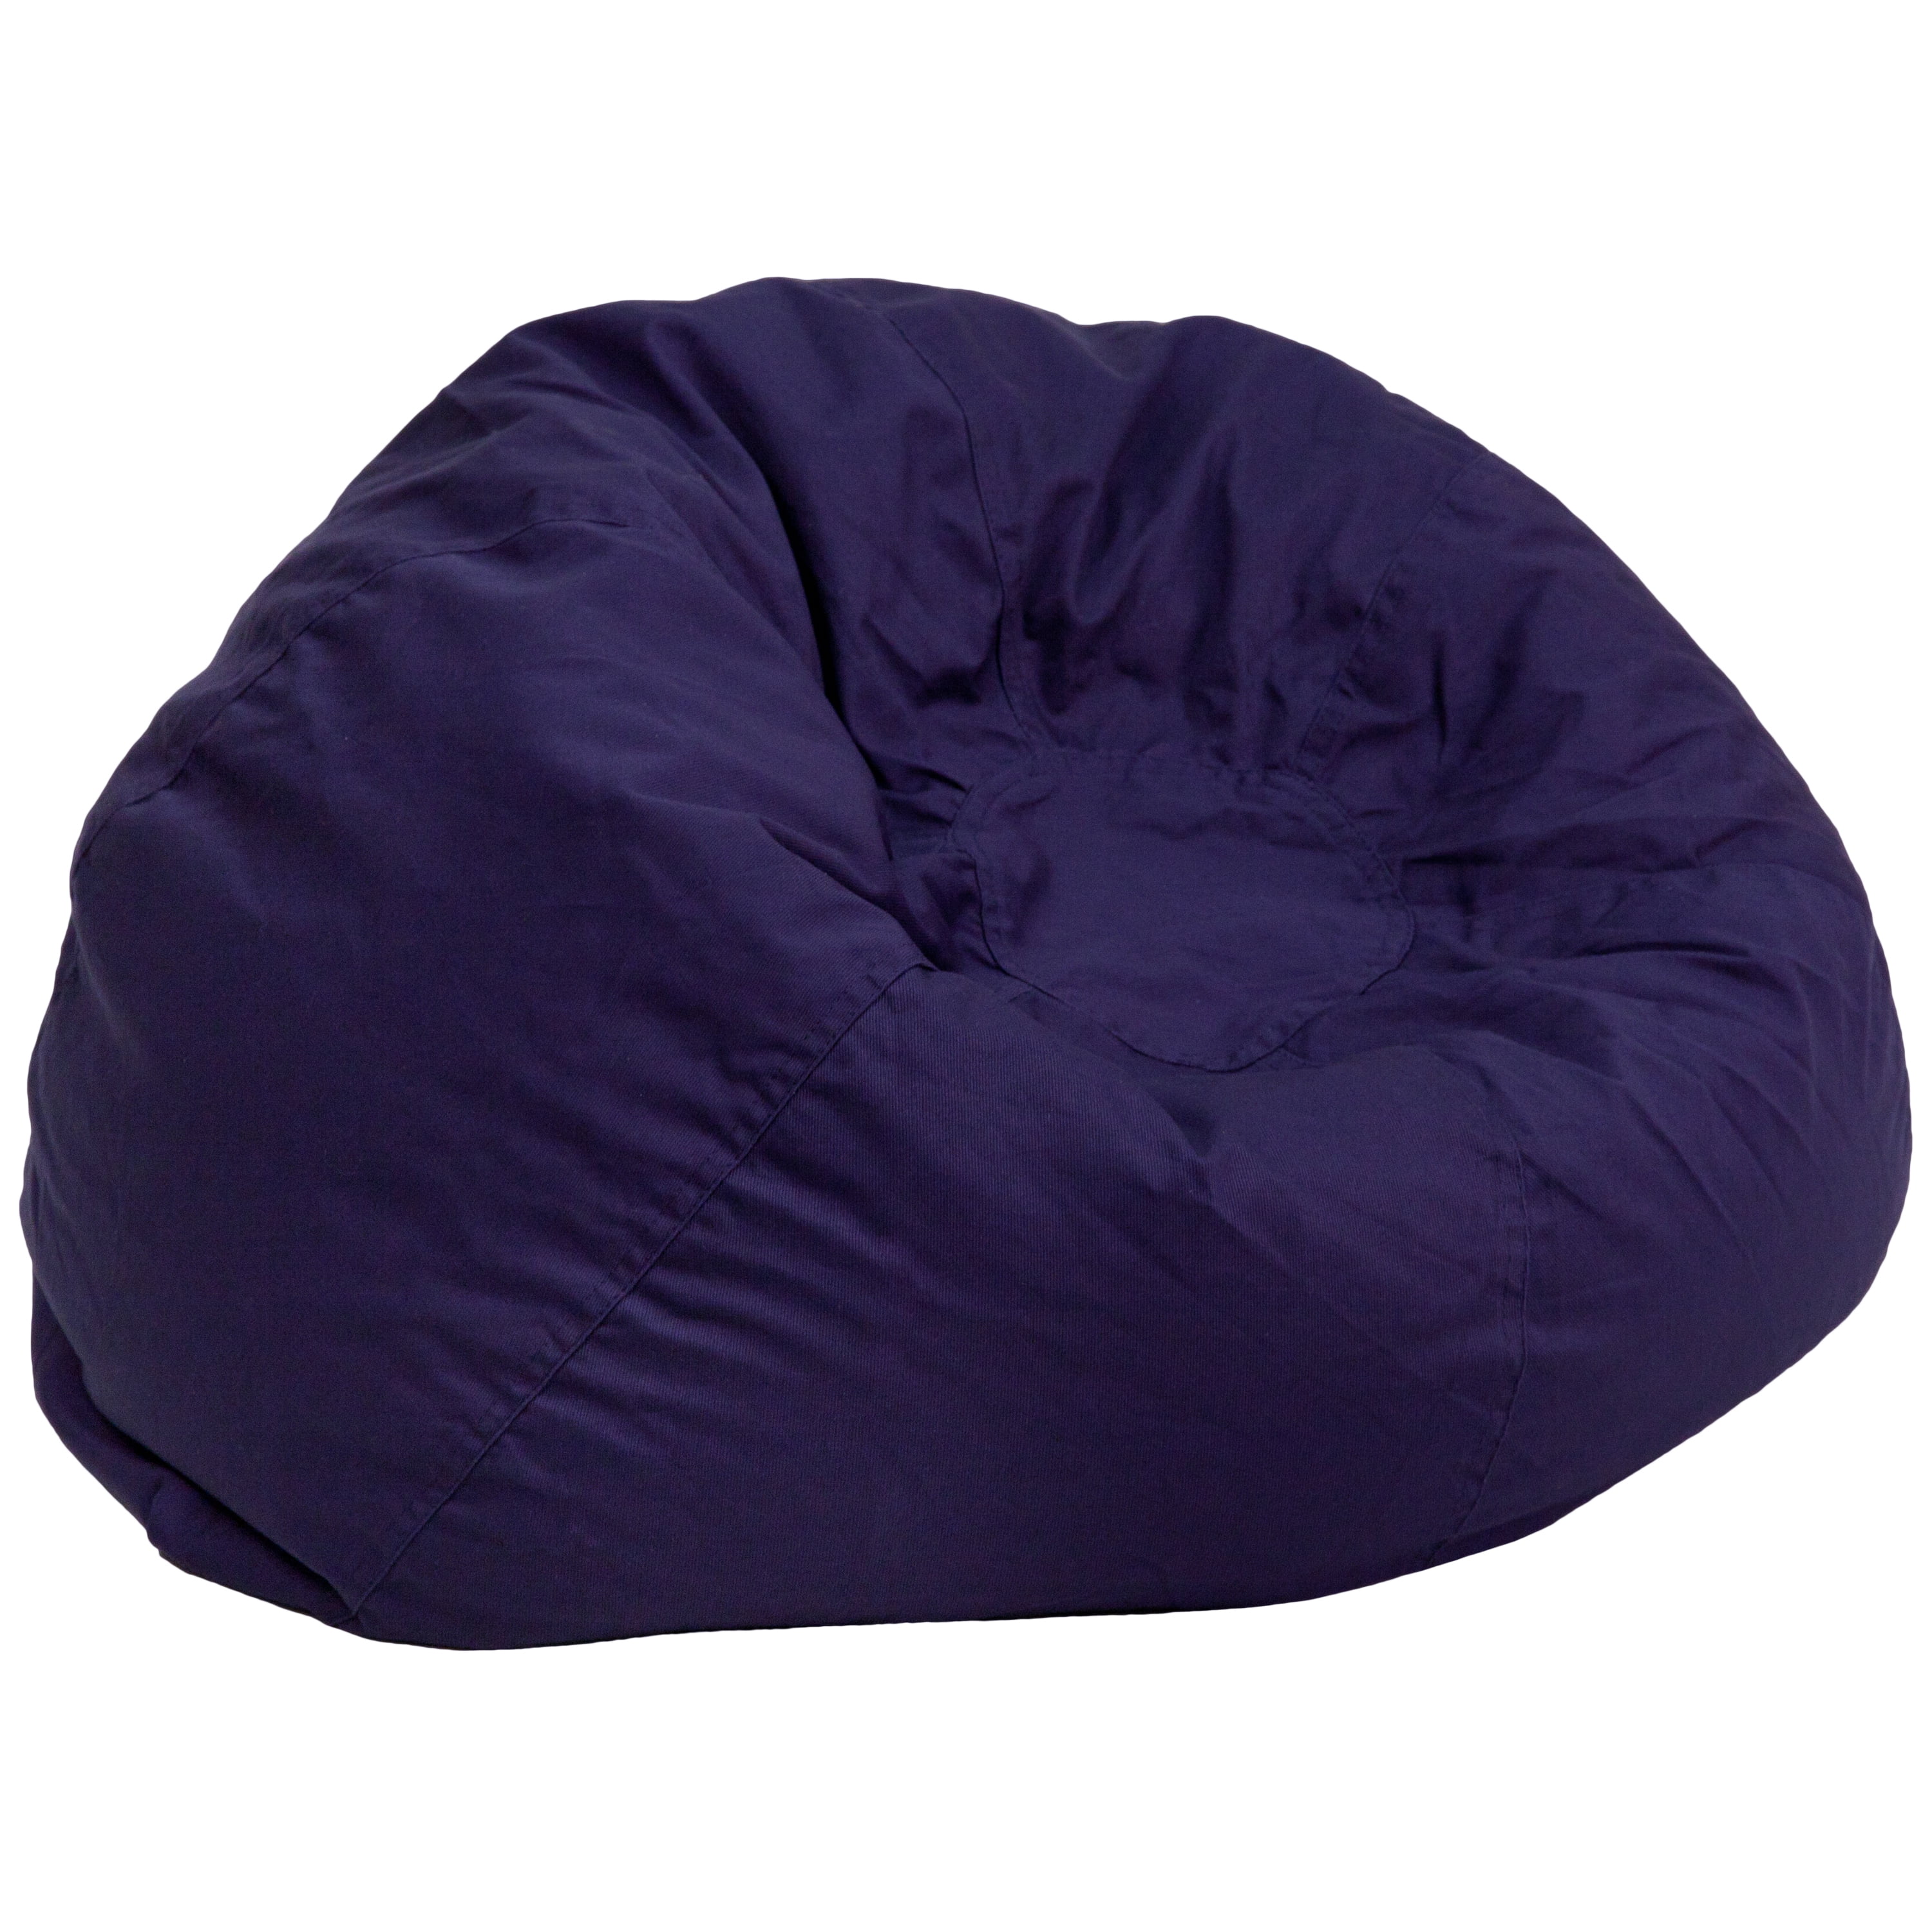 bean bag couch for kids